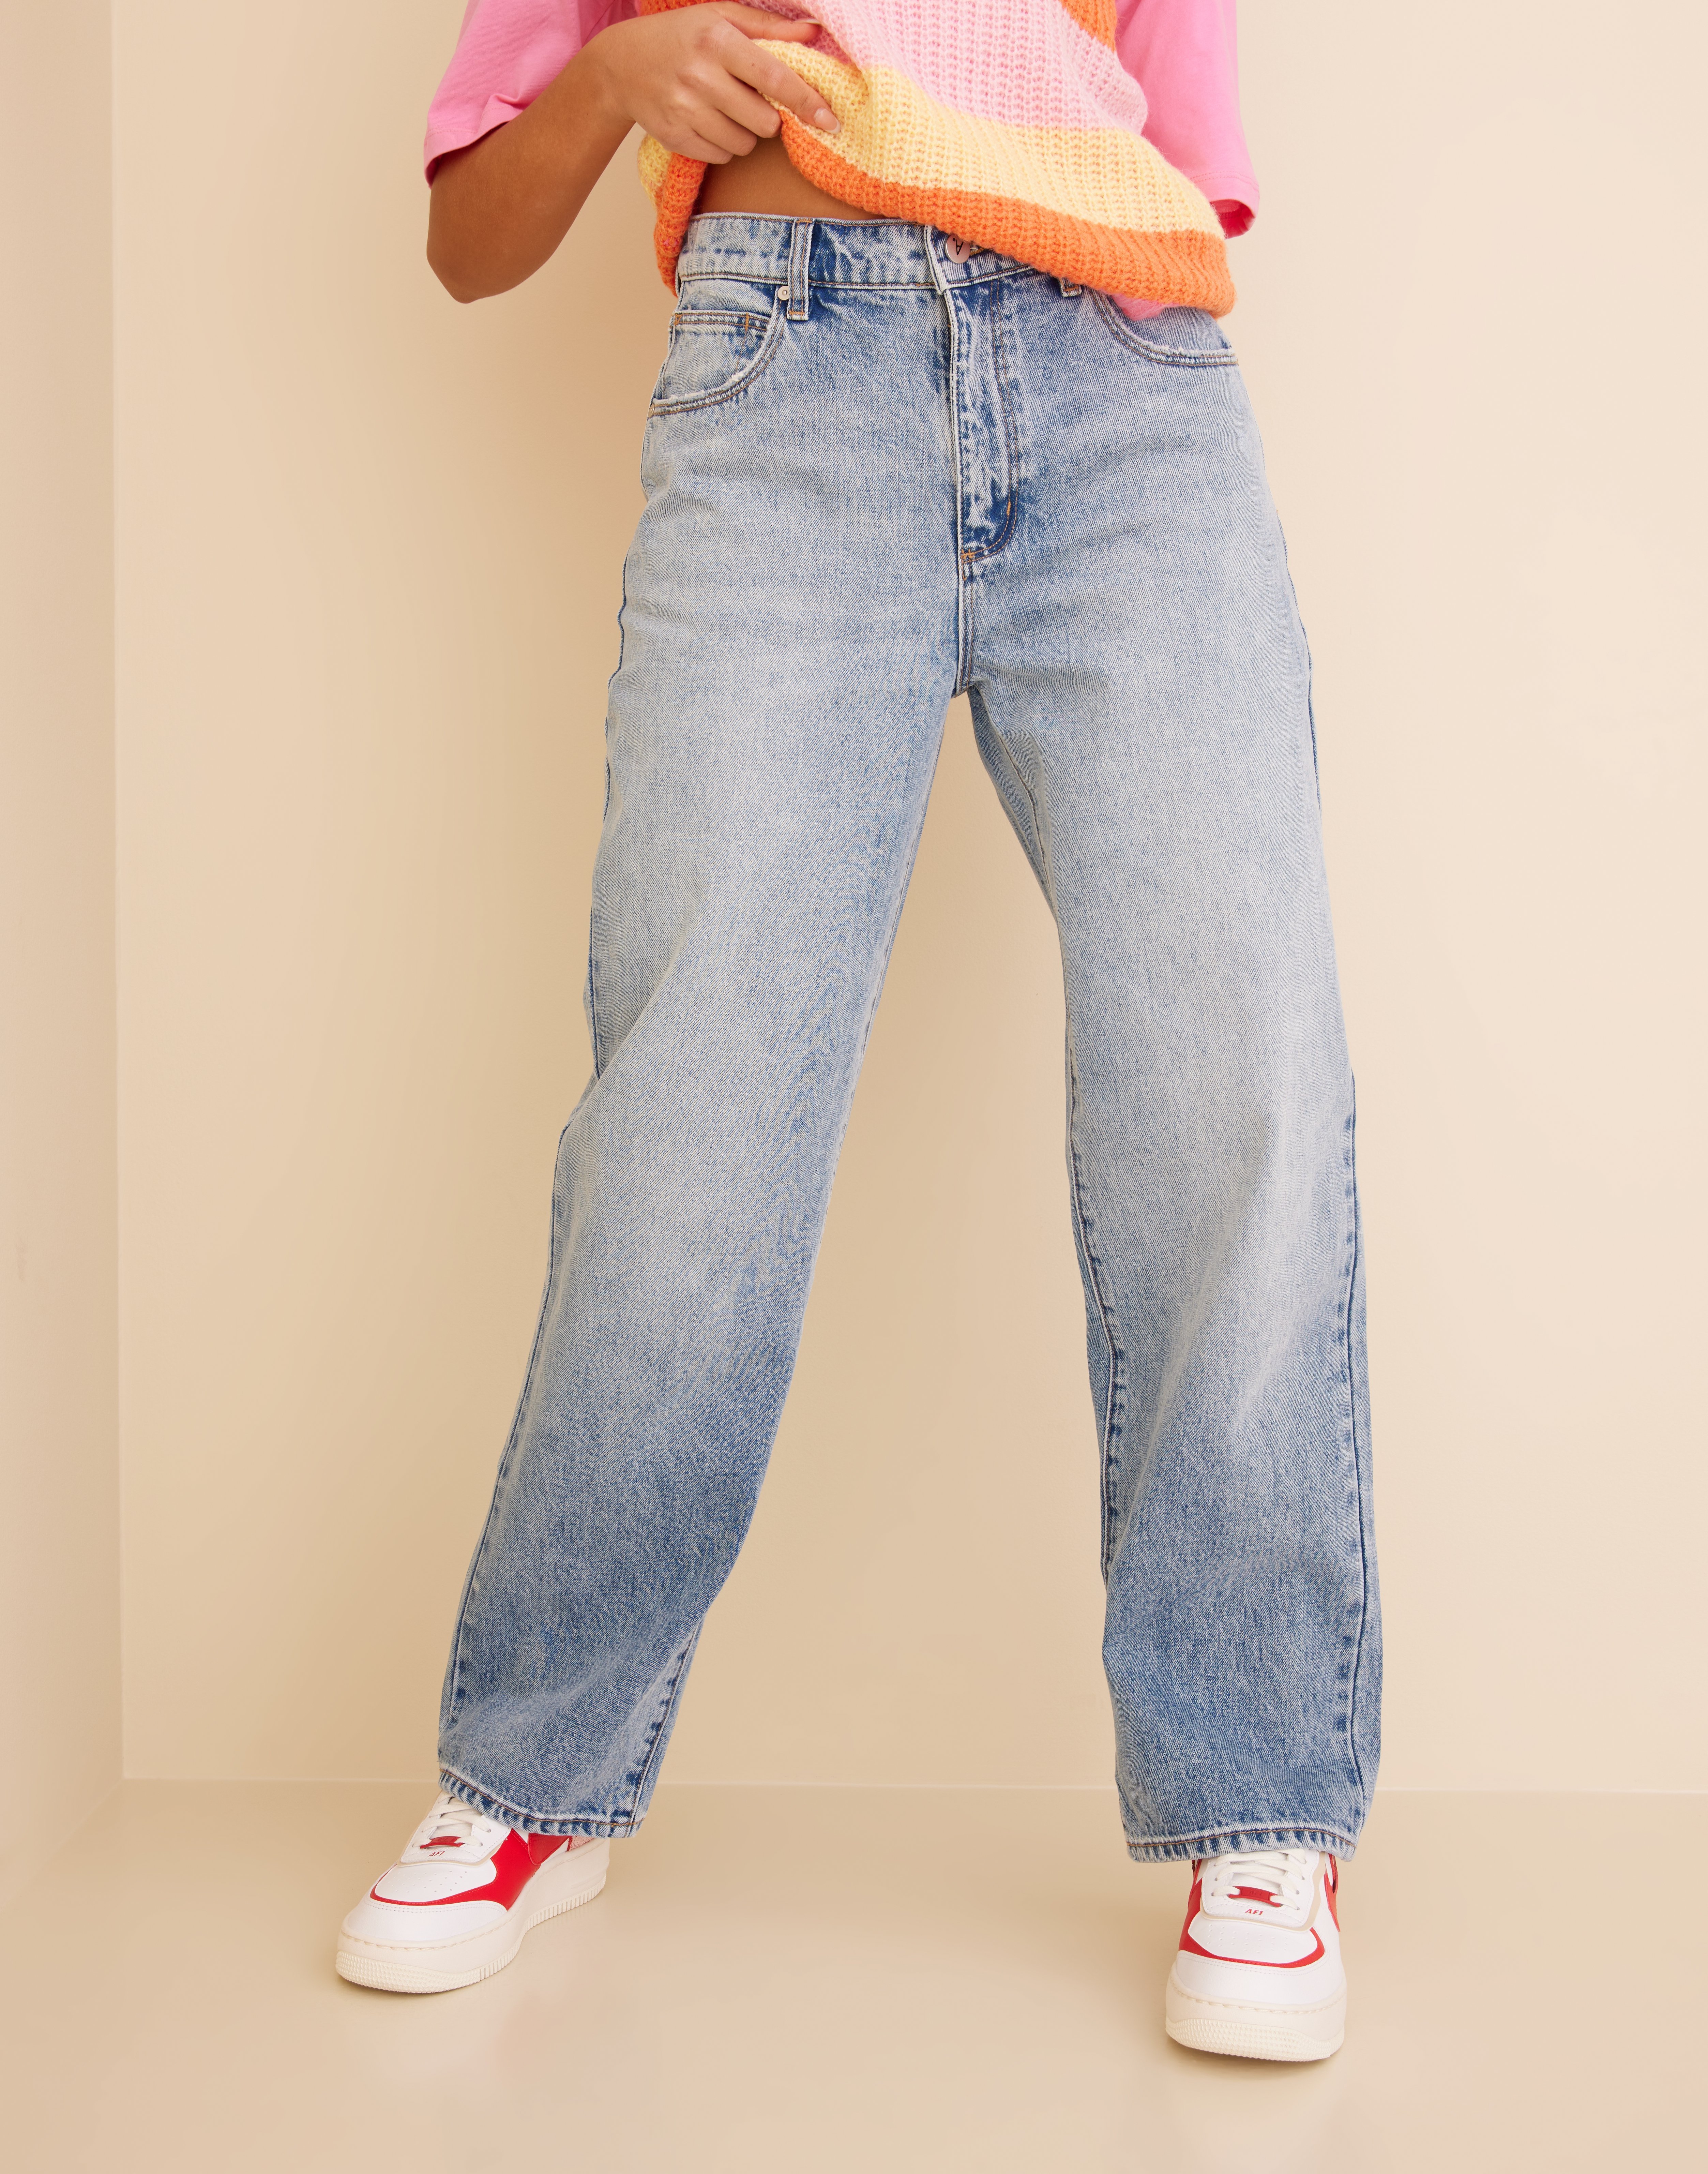 Abrand Jeans - Straight - A Slouch Jeans Lily - Jeans - Straight